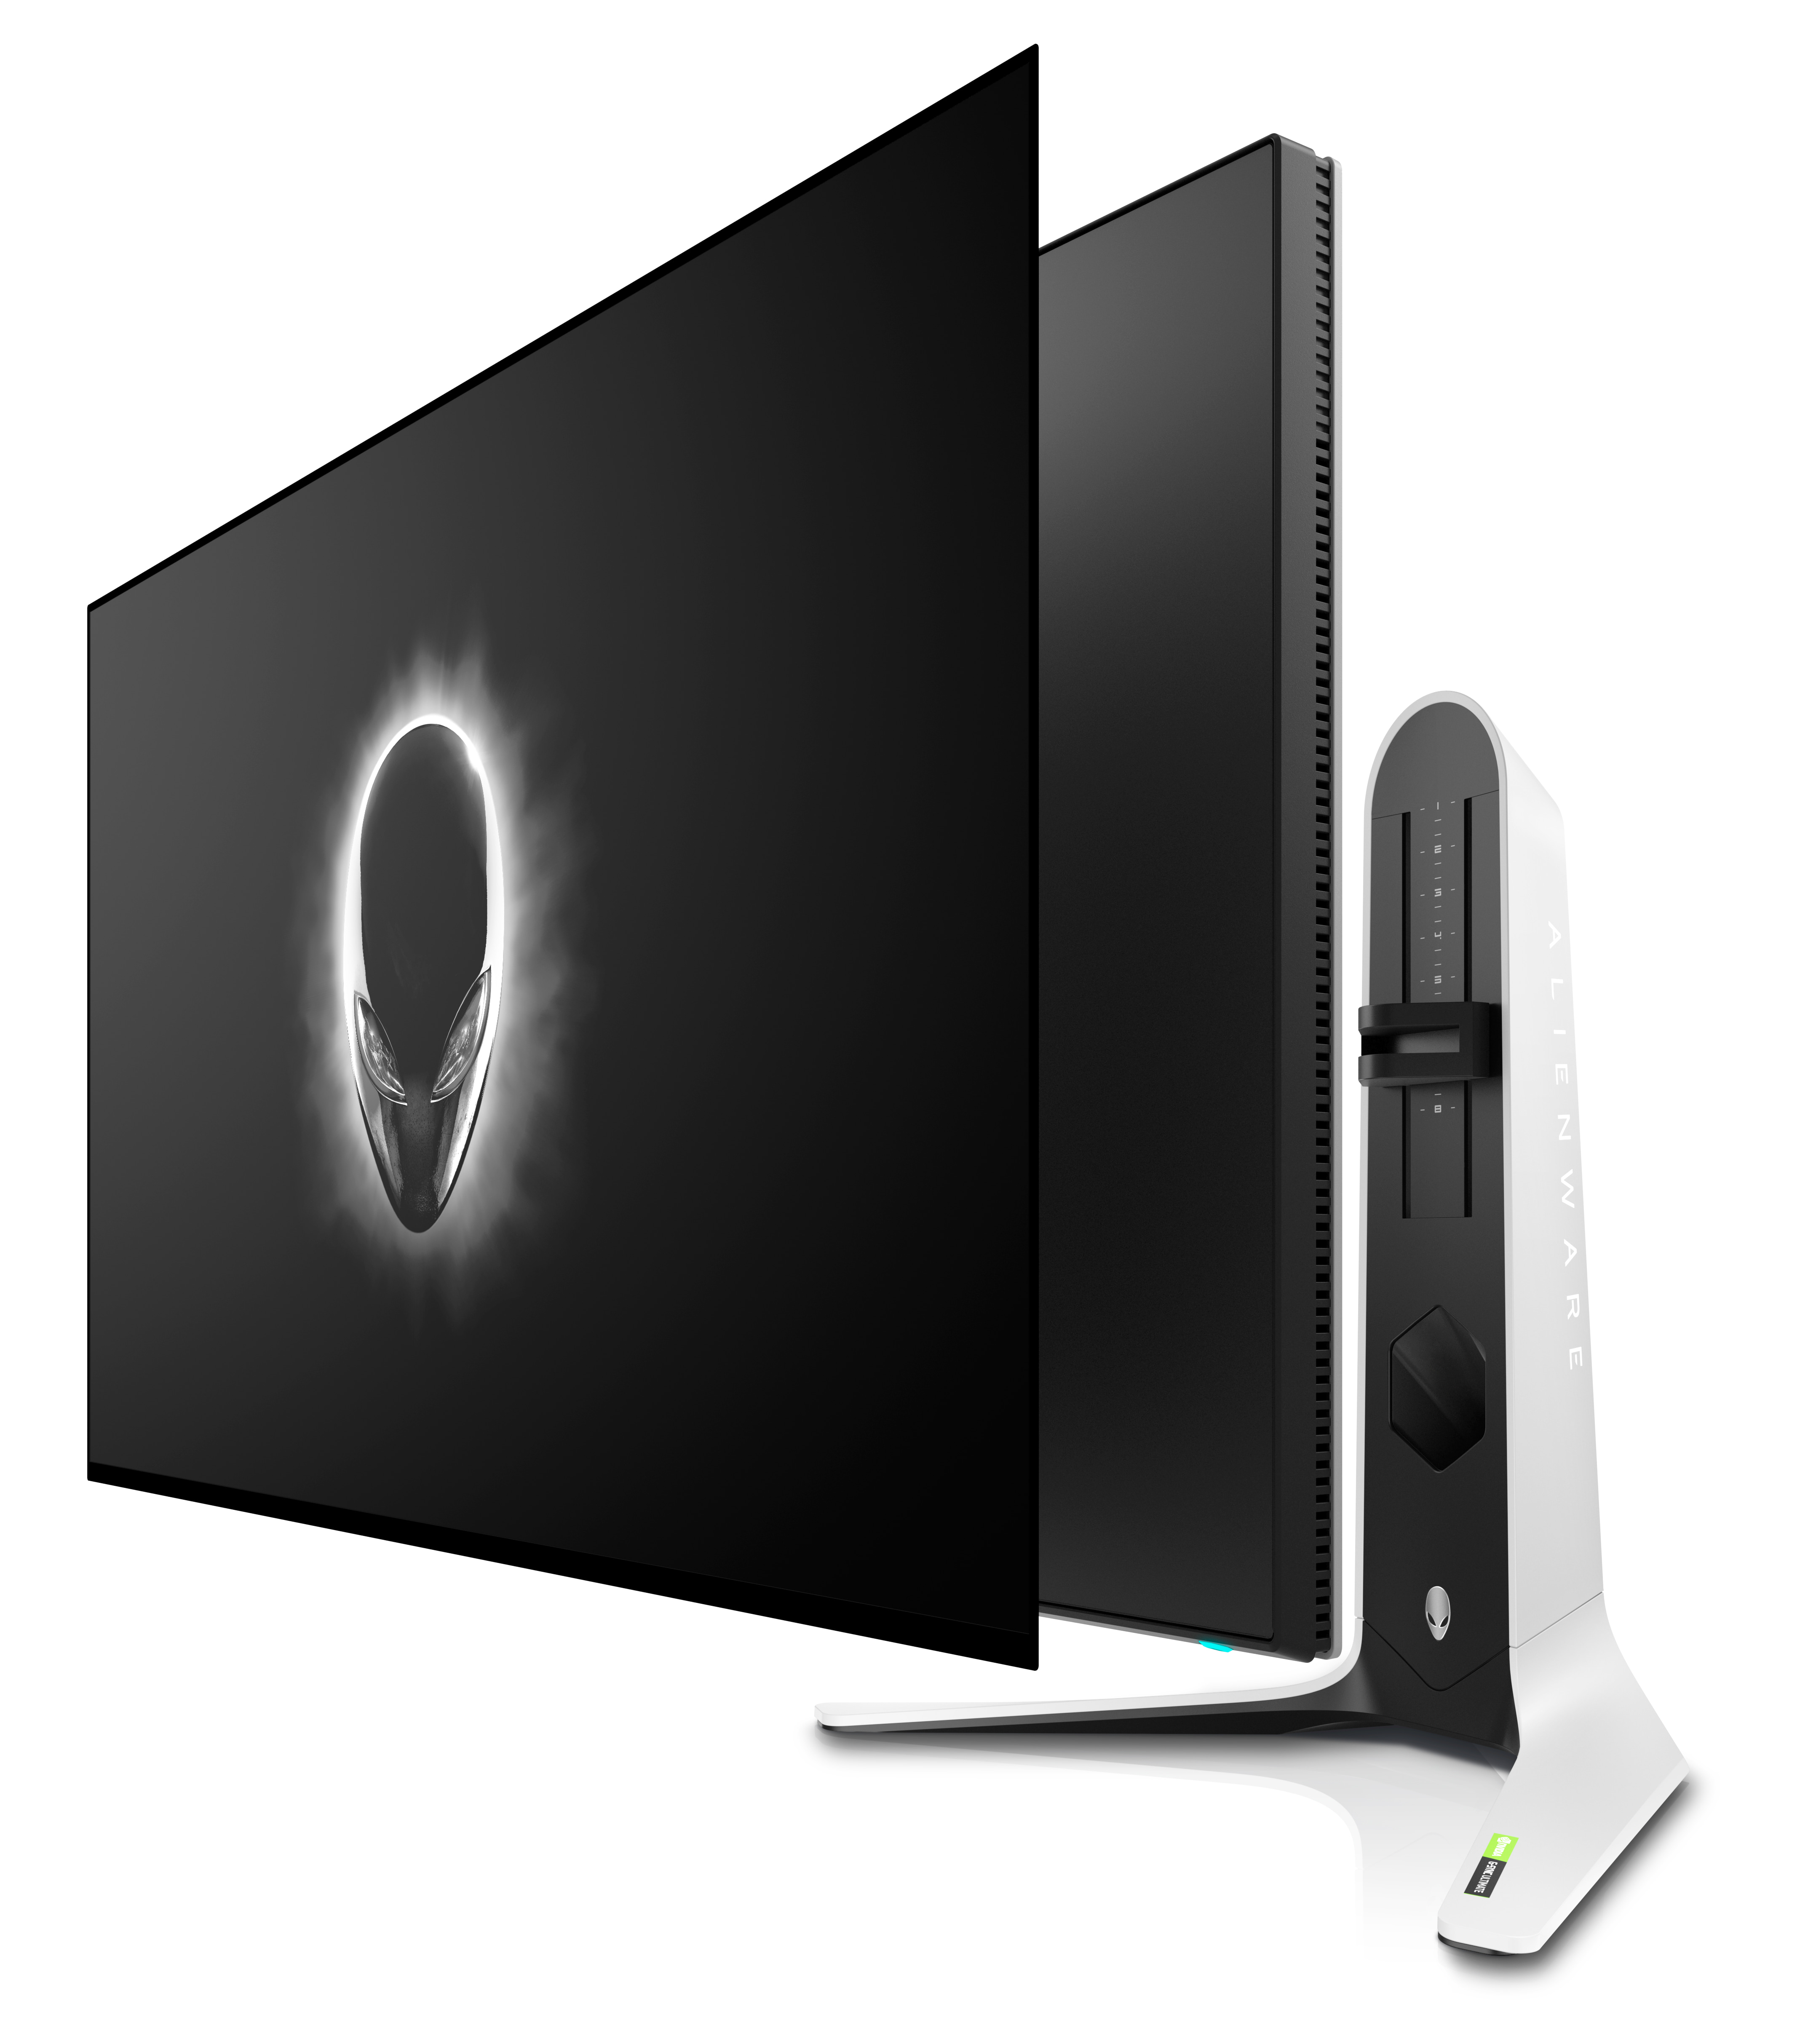 Alienware 27 Gaming Monitor - AW2721D